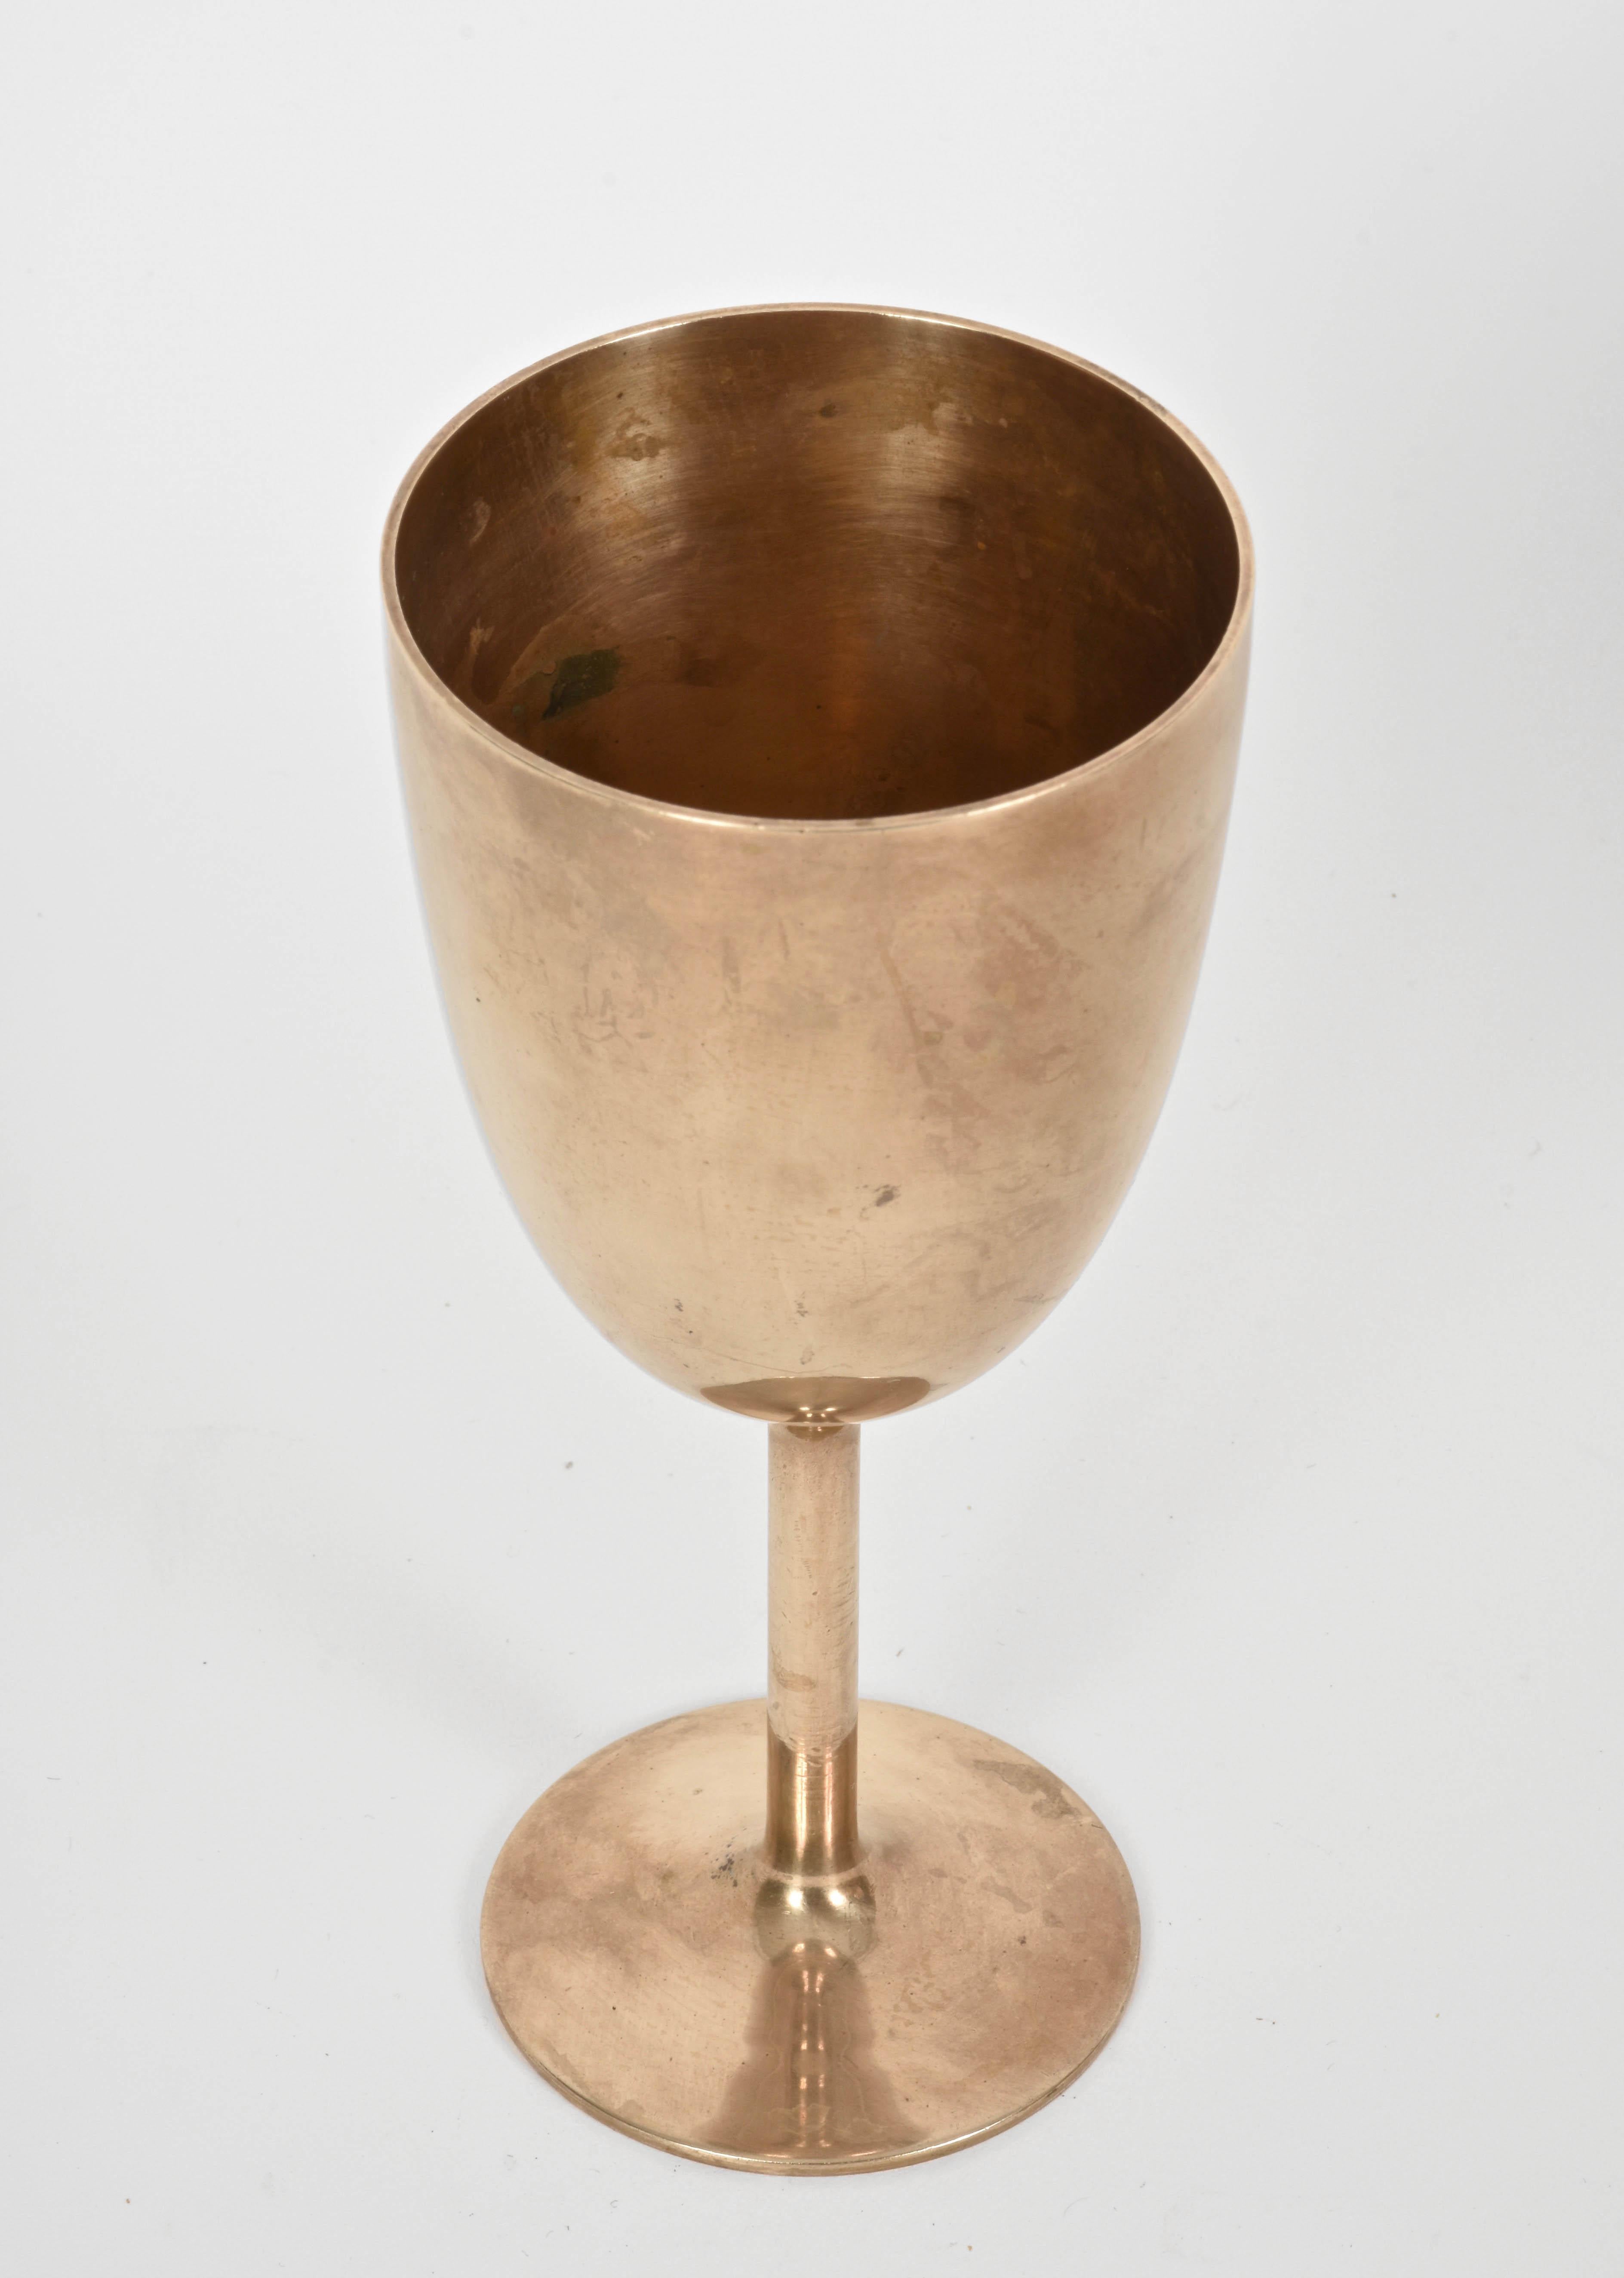 Set of six elegant midcentury Italian Regency solid brass chalices.

These amazing pieces are wonderful as in solid brass with a simple design.

A sophisticated and Classic set of pieces that can smart your barware and serving.

Measures